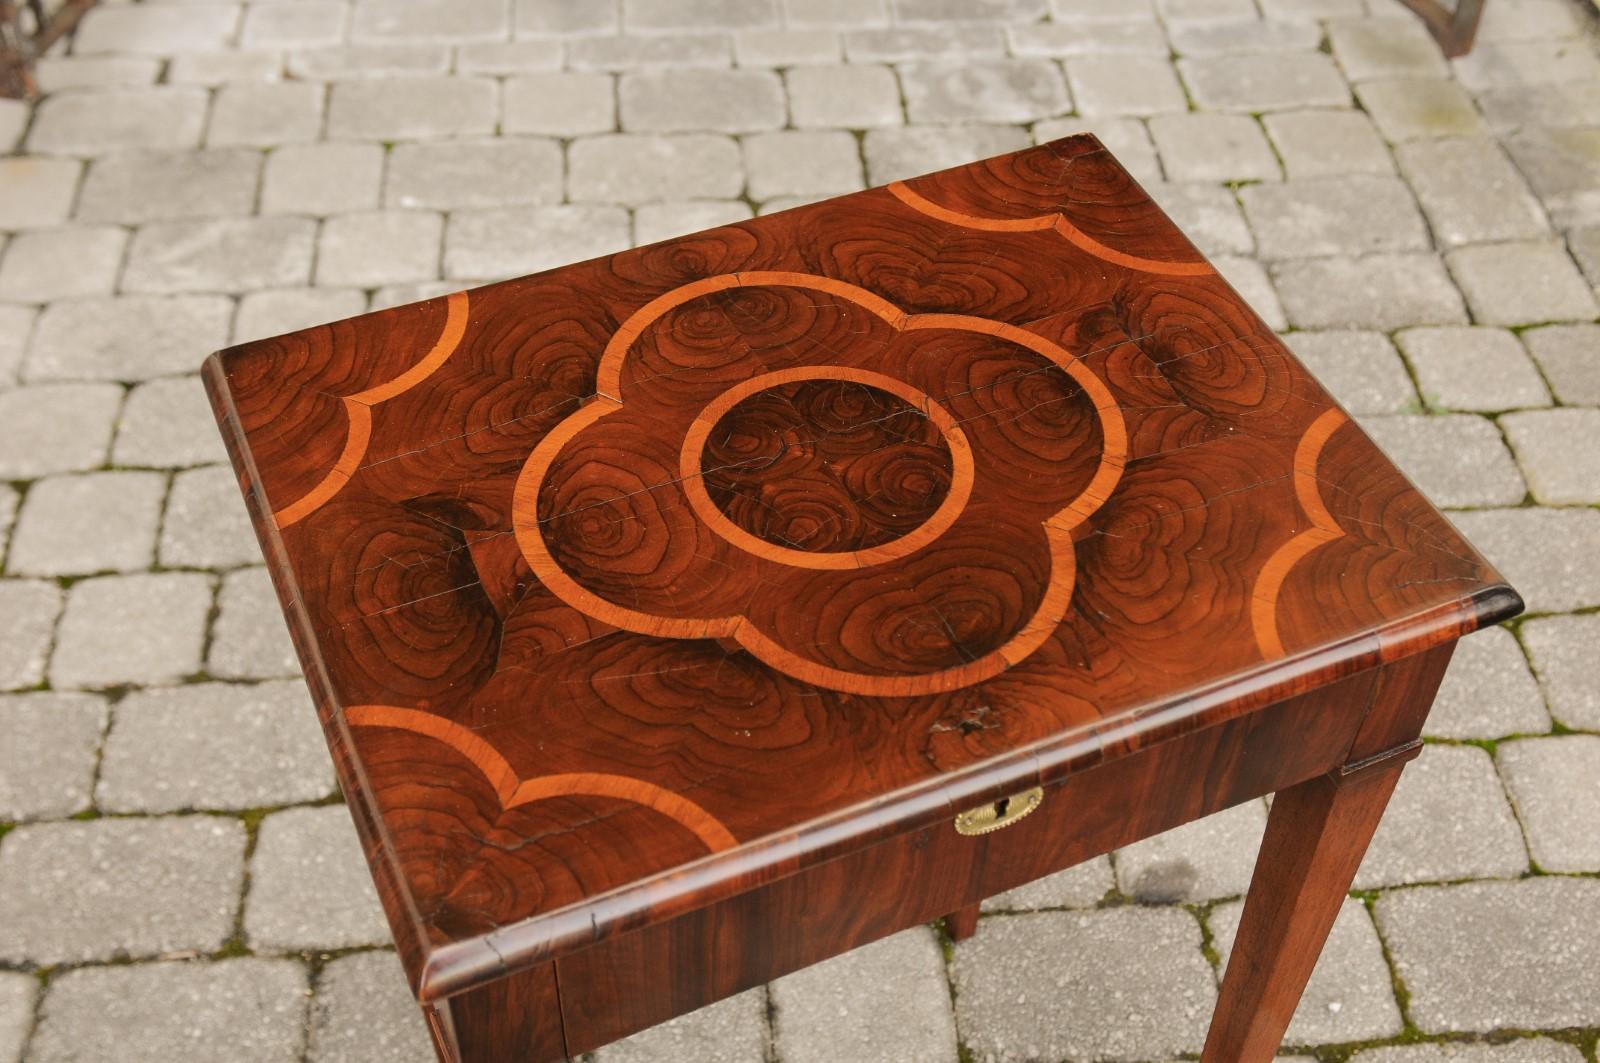 Italian 1820s Walnut Side Table with Oyster Veneer and Inlaid Quadrilobe Motif In Good Condition For Sale In Atlanta, GA